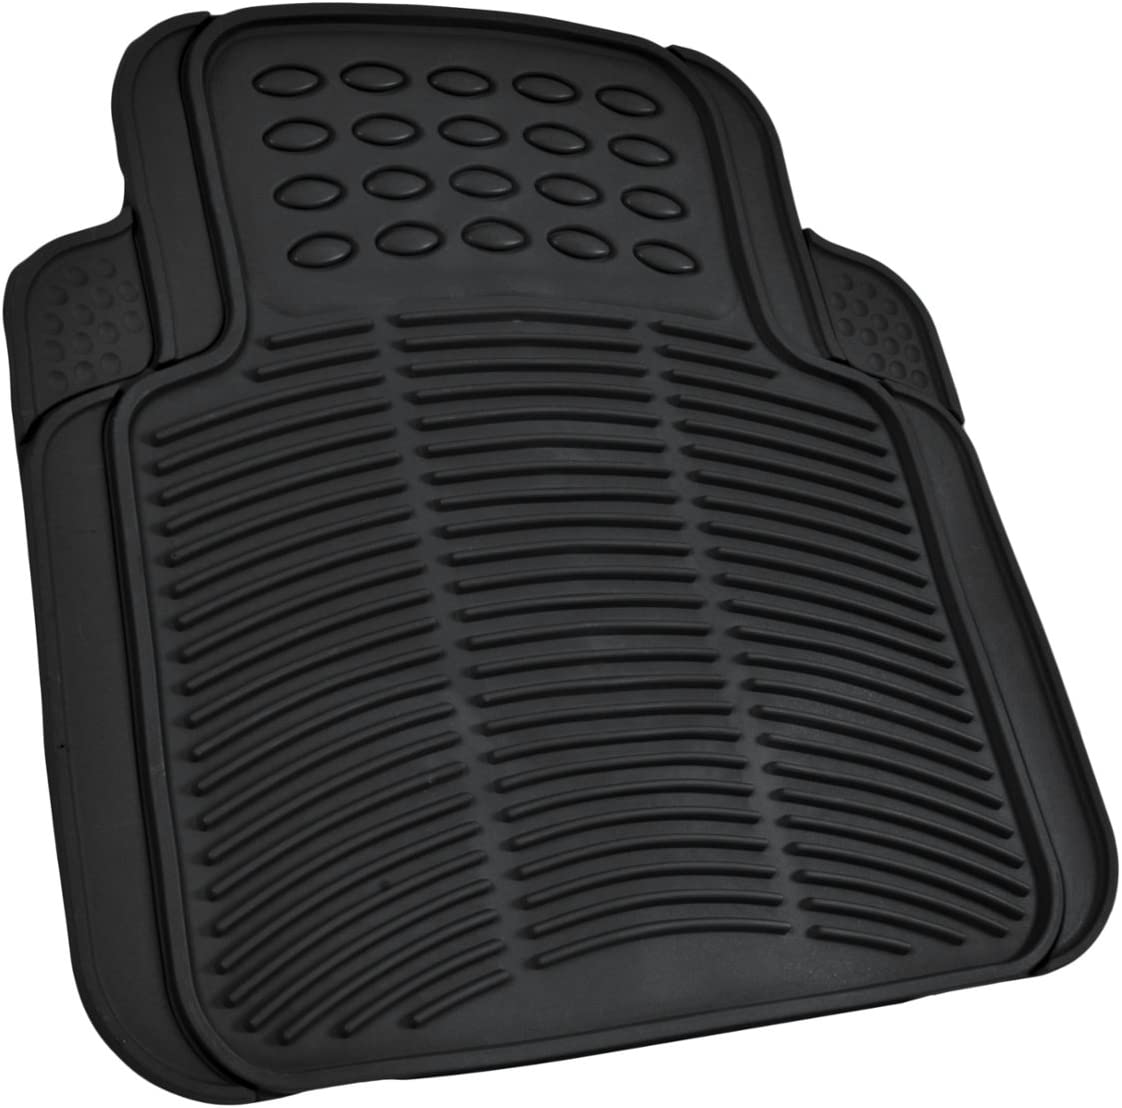 Oshotto Anti Skid Rubber Car Foot Mat for All Cars (Set of 4, Black)